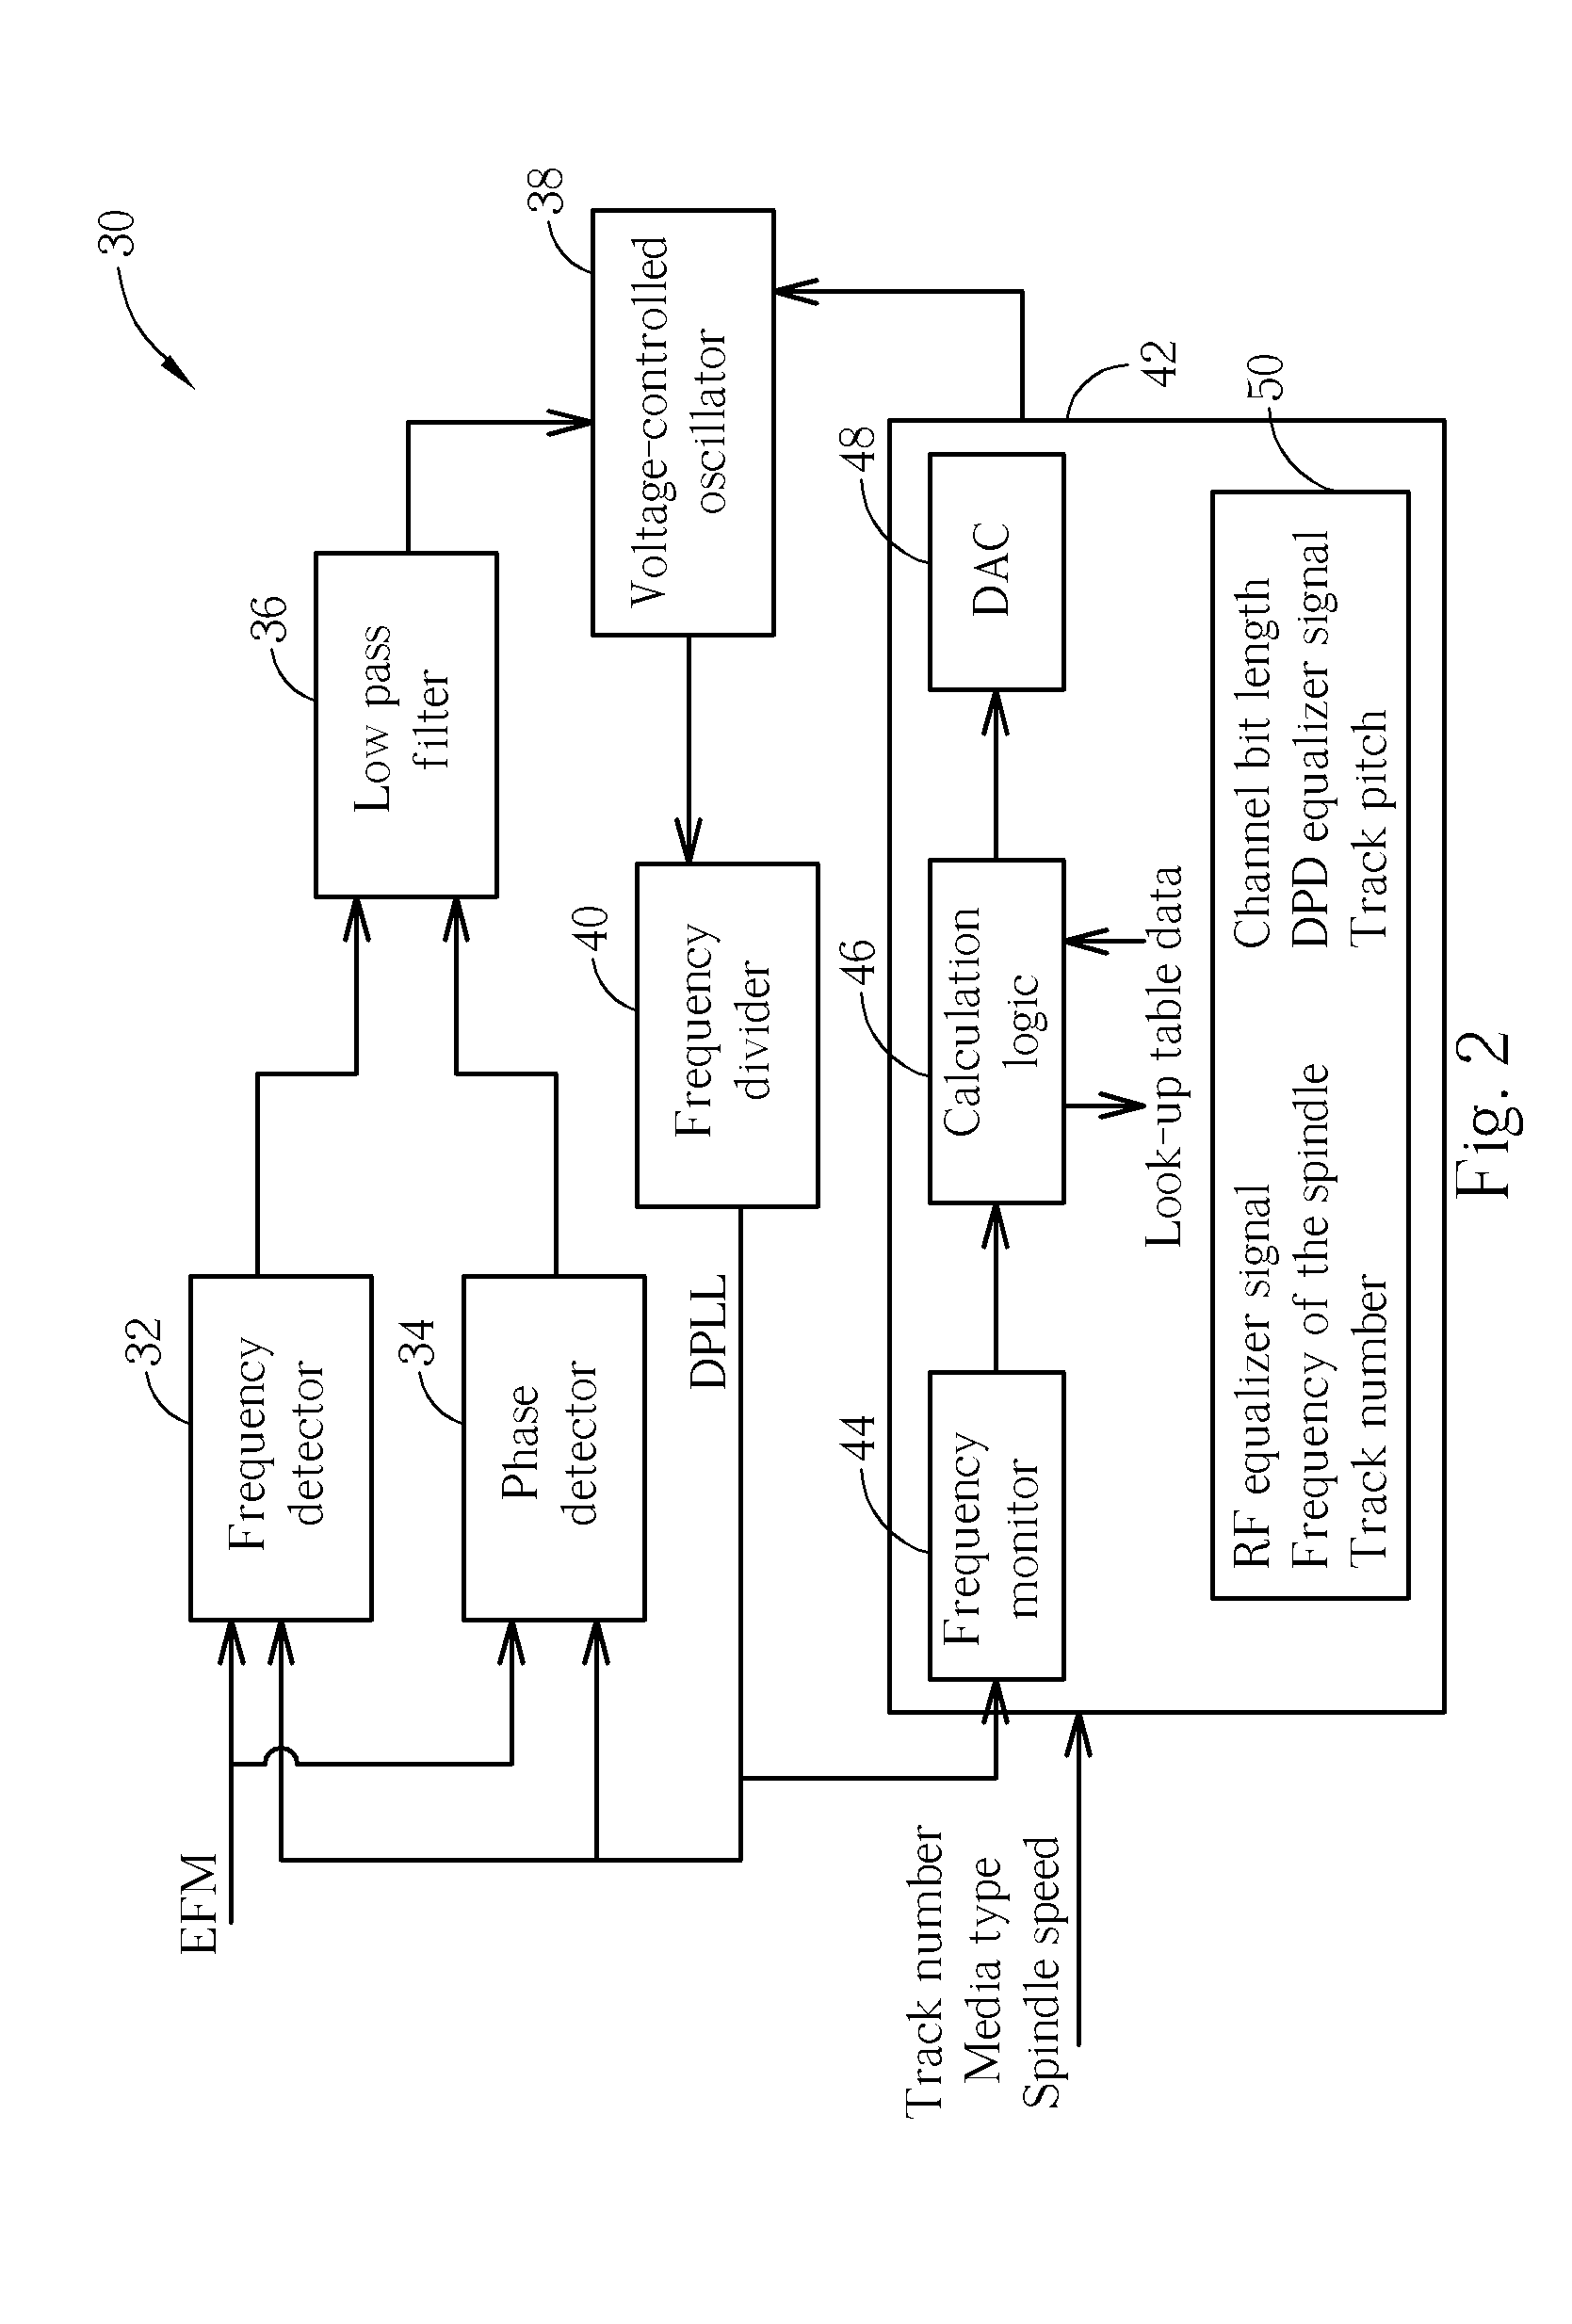 Apparatus for controlling an optical disk drive by calculating a target frequency of a DPLL signal